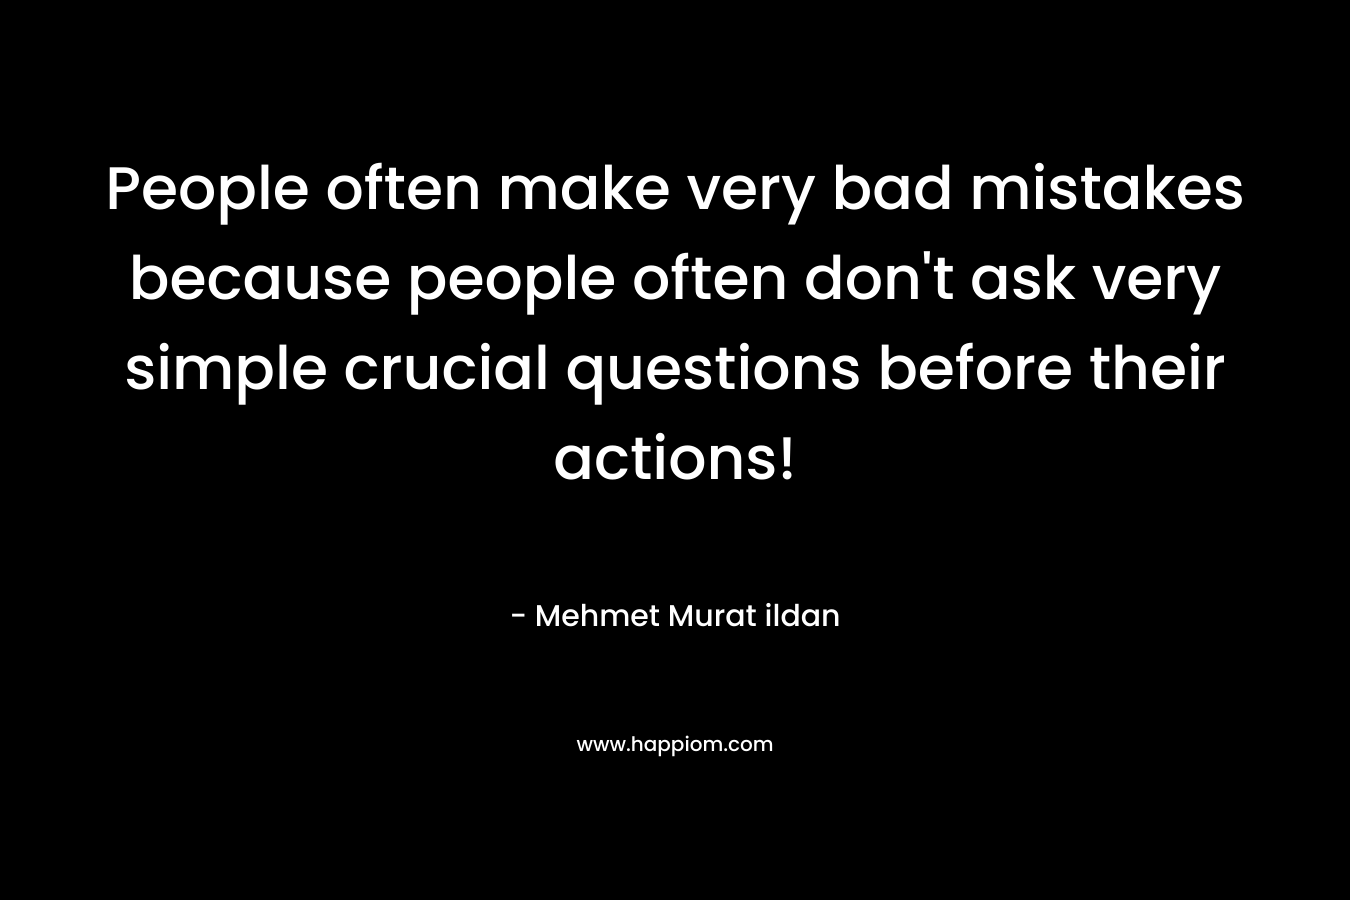 People often make very bad mistakes because people often don't ask very simple crucial questions before their actions!